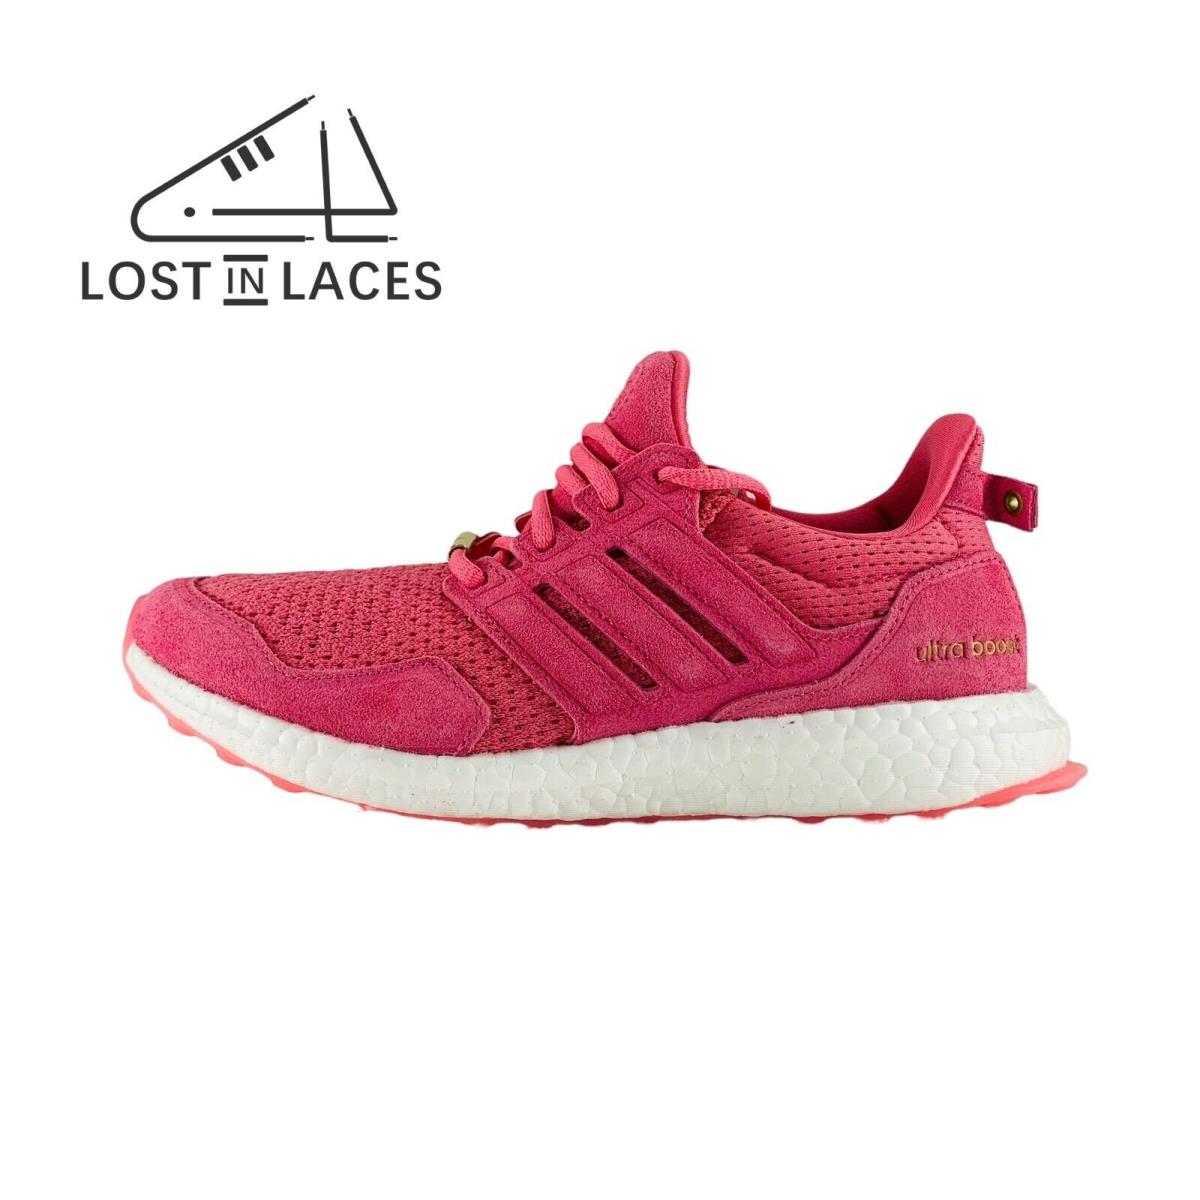 Adidas Ultraboost 1.0 Pink Fusion Gold Running Shoes ID9664 Women`s Sizes